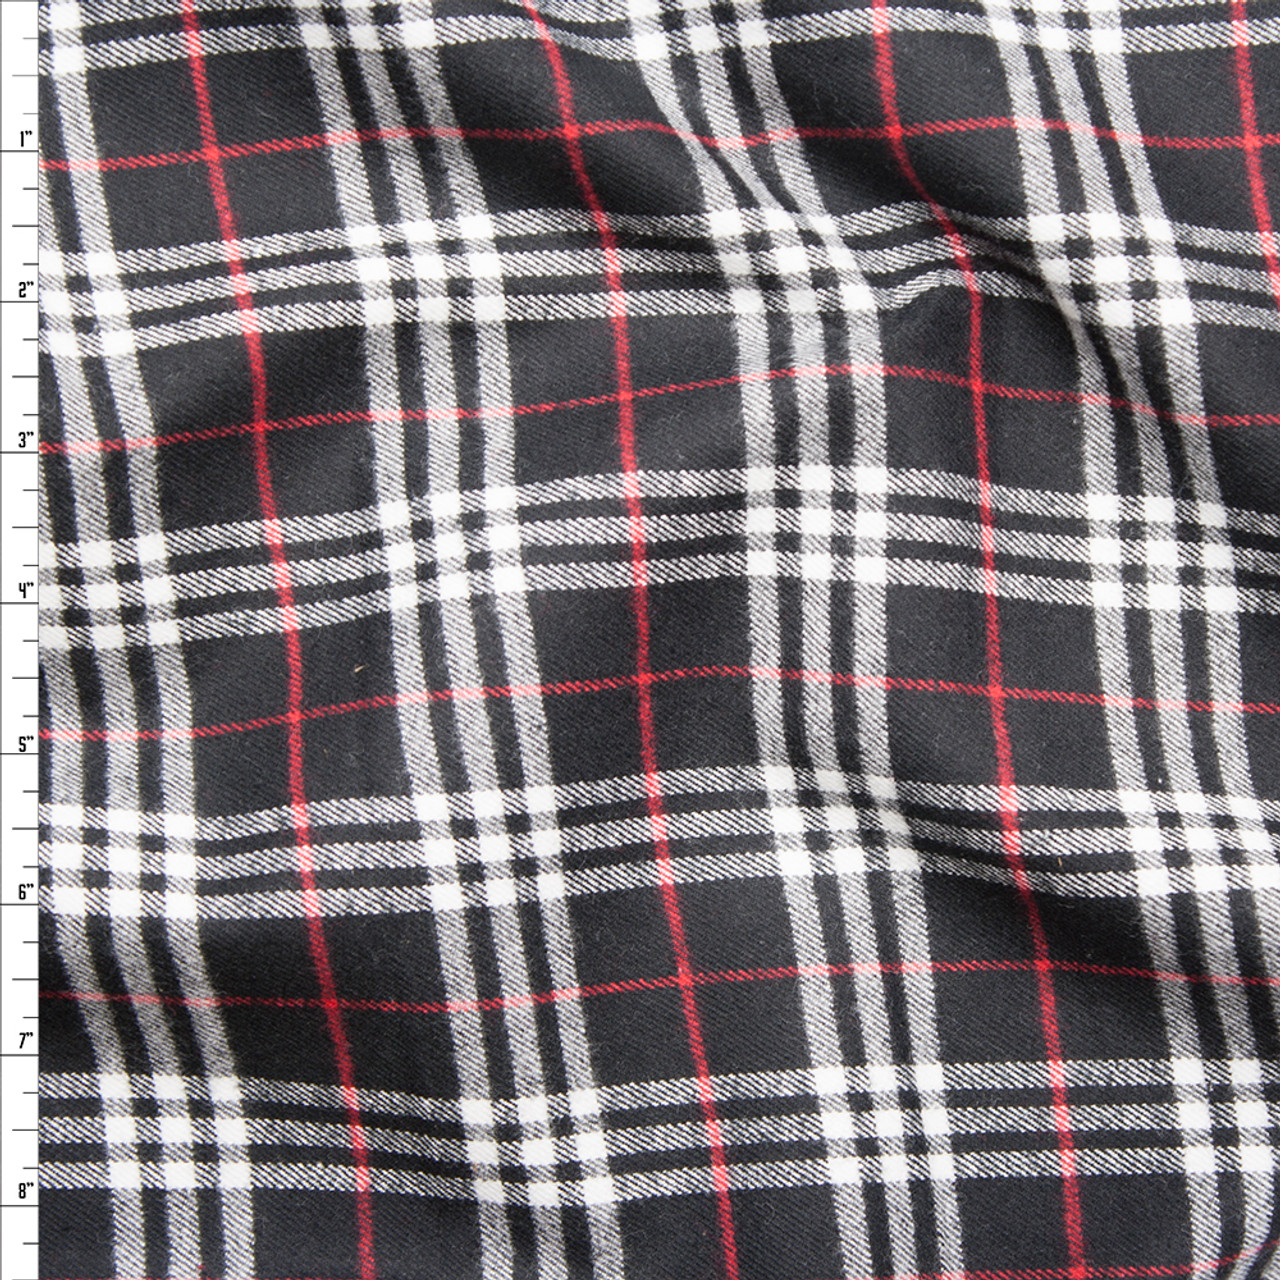 Flannel Plaid Black Red Gray White Cotton Flannel Fabric Print by Yard  D278.39 